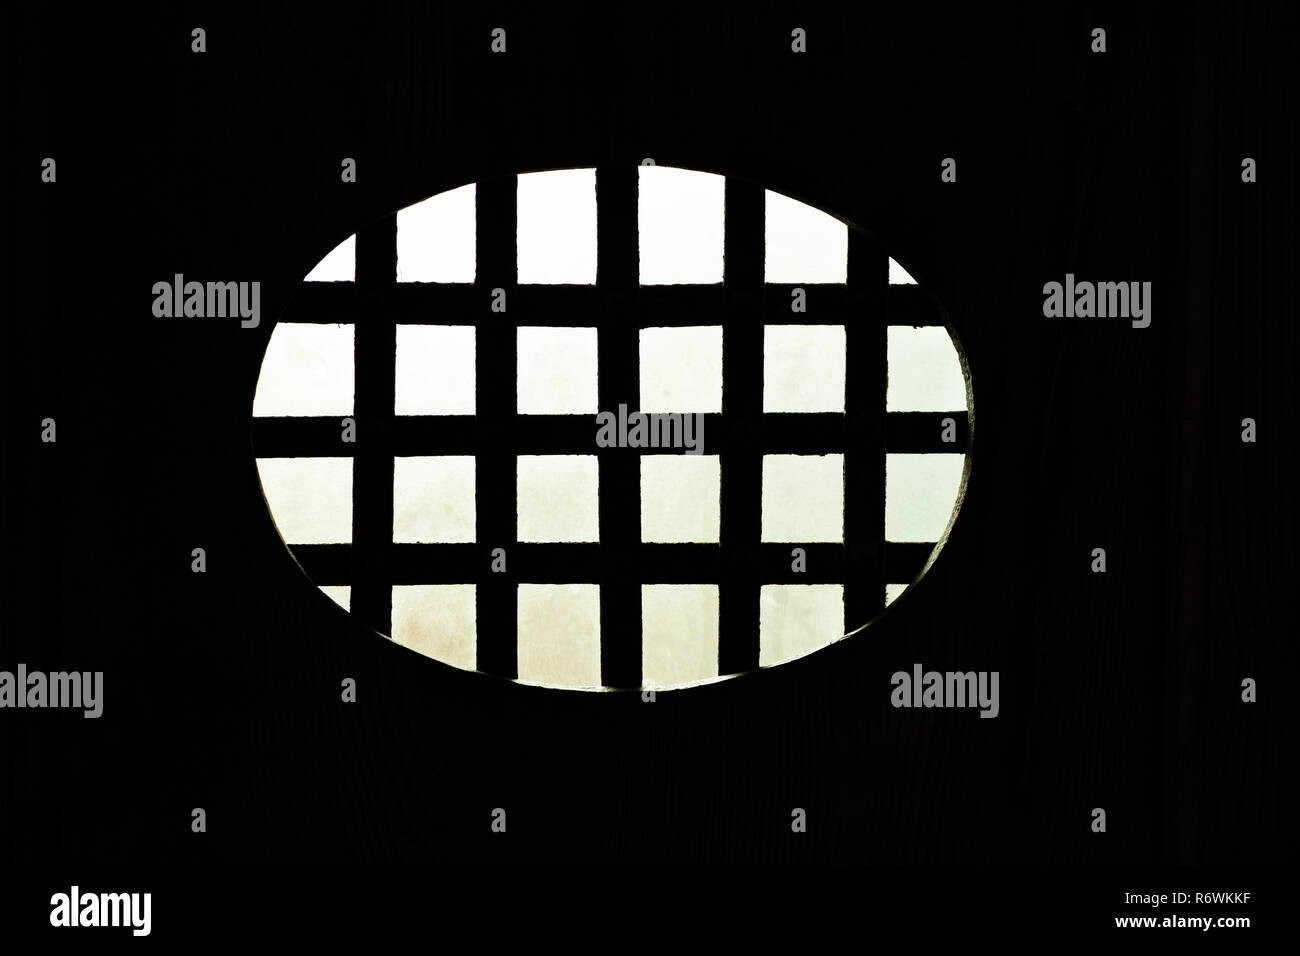 phot from the dark interior of an oval metal grid with the illuminated exterior Stock Photo